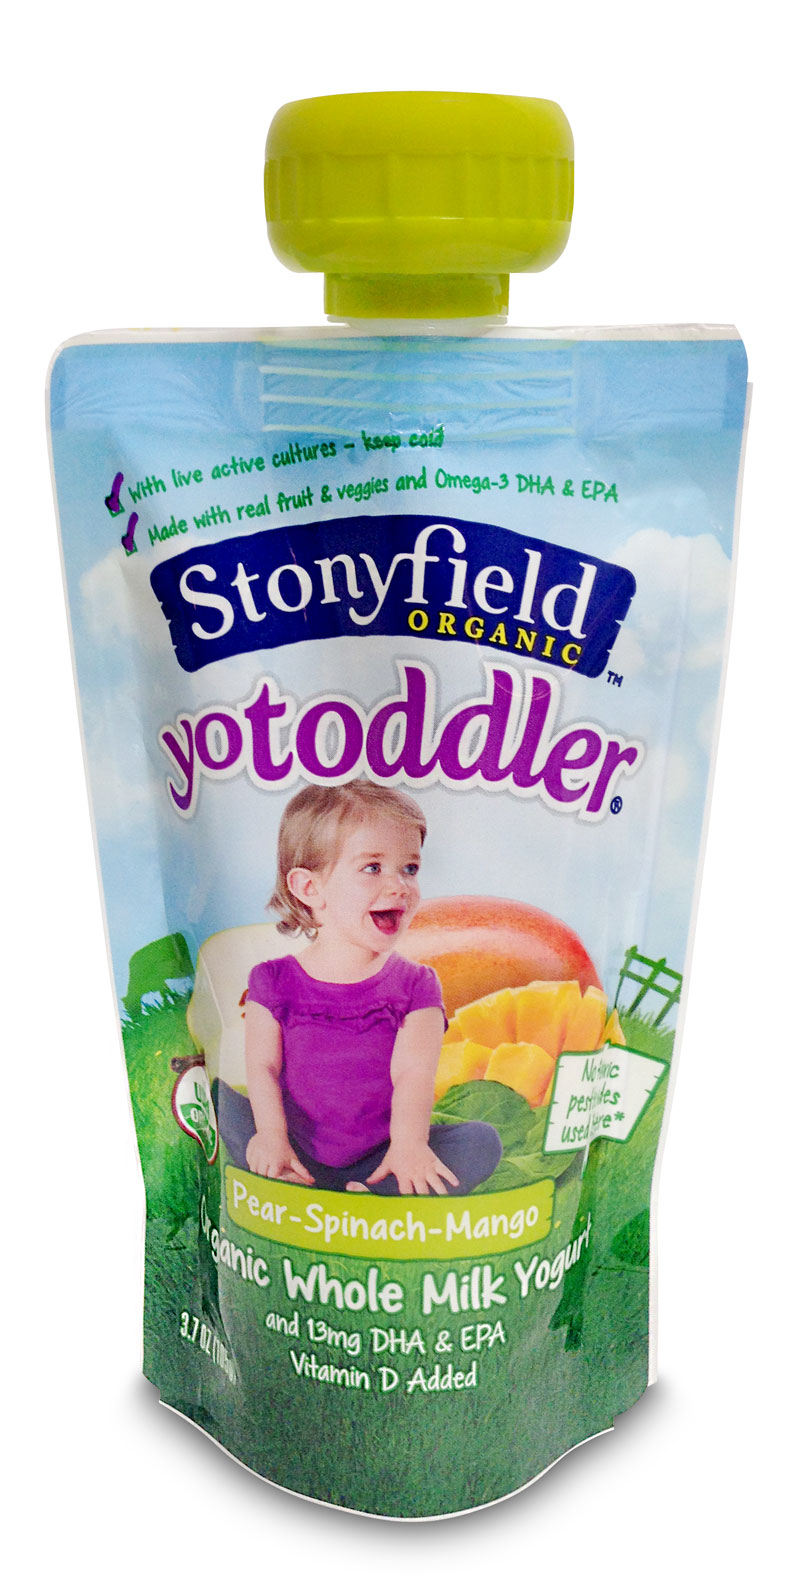 New yogurt pouch packaging films produced by Clear Lam Packaging for Stonyfield offer lightweight and durable packaging solution for grab-and-go convenience.